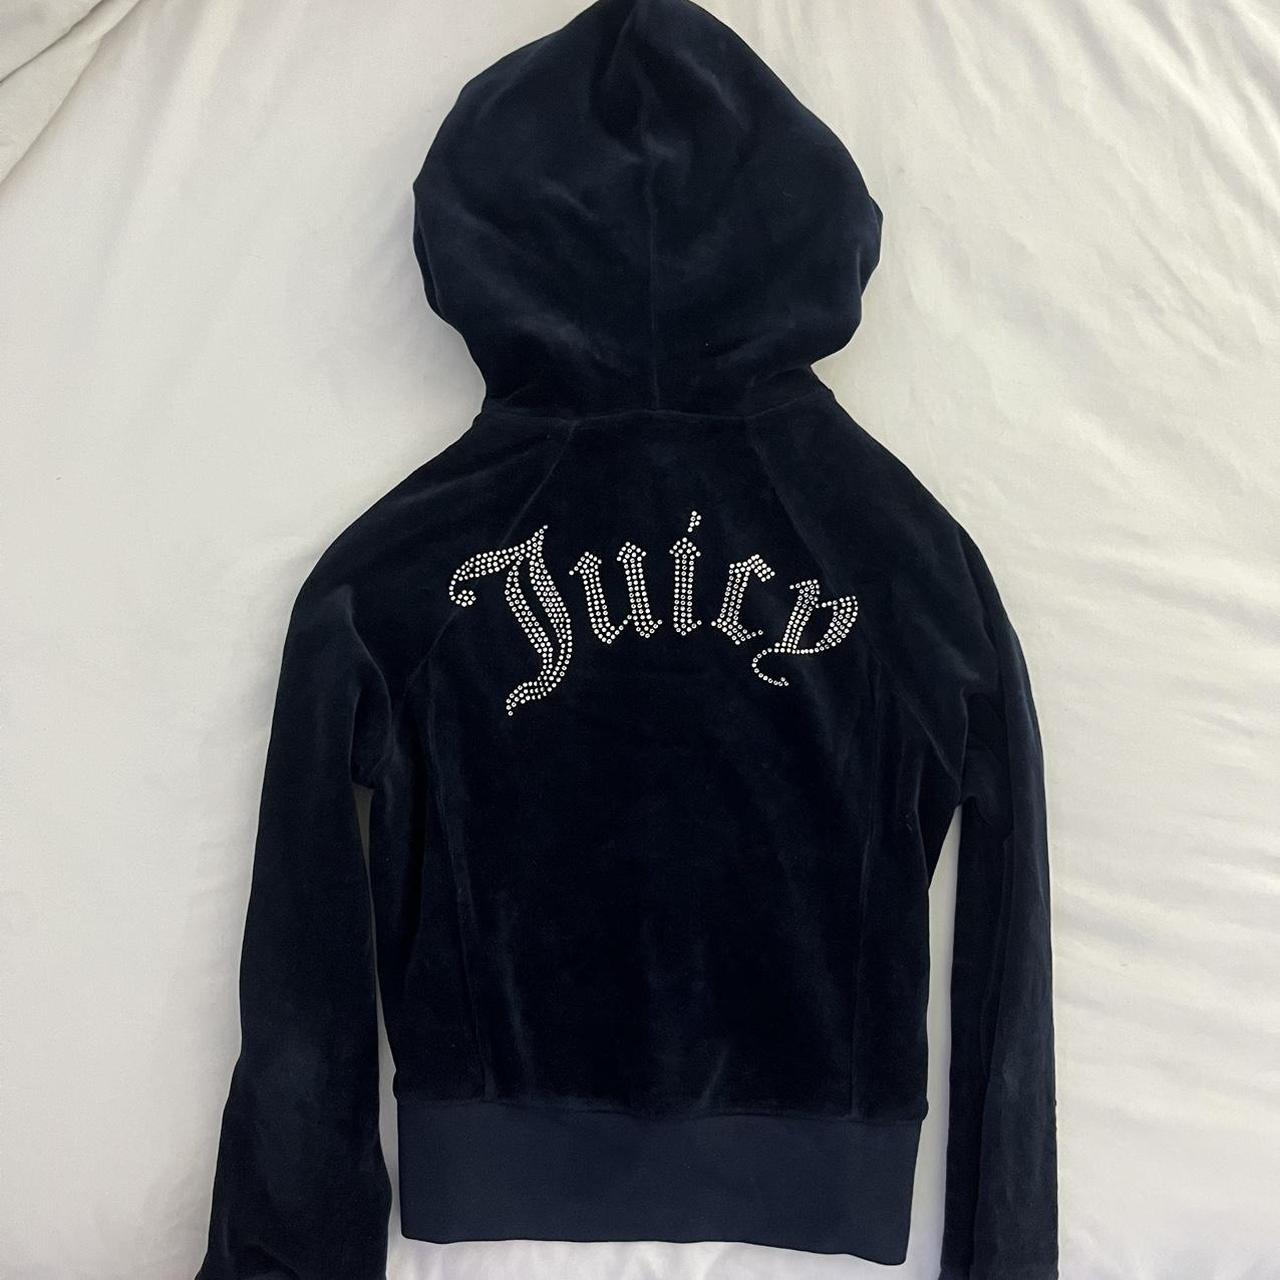 Juicy Couture Women's Black and Silver Jacket | Depop